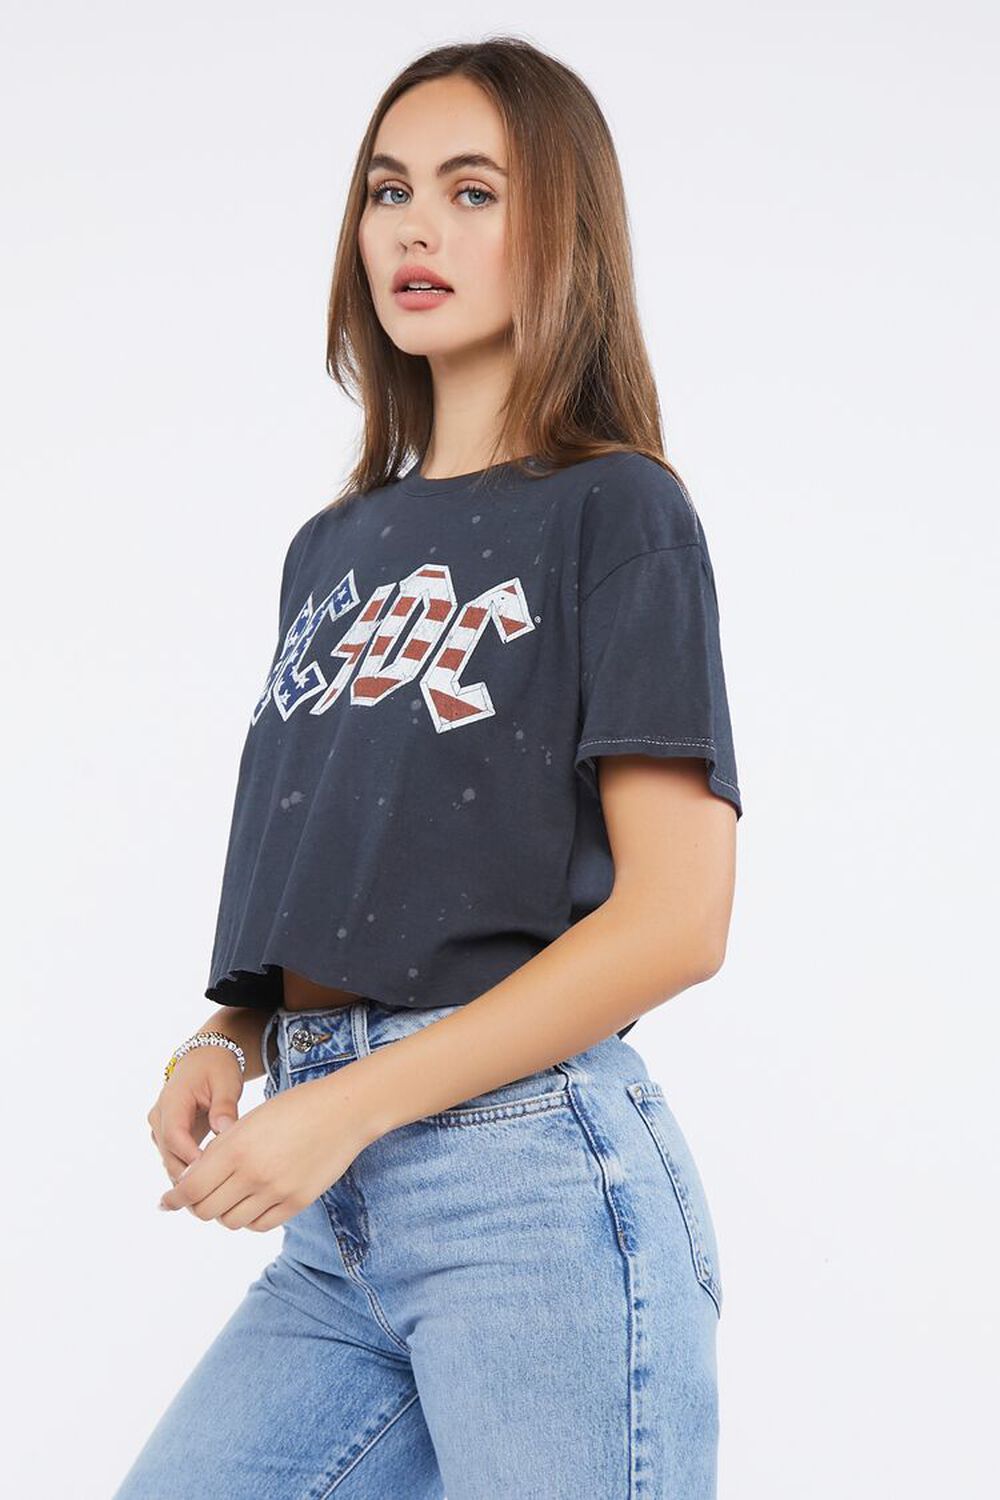 BLACK/MULTI ACDC Tour Graphic Cropped Tee, image 2